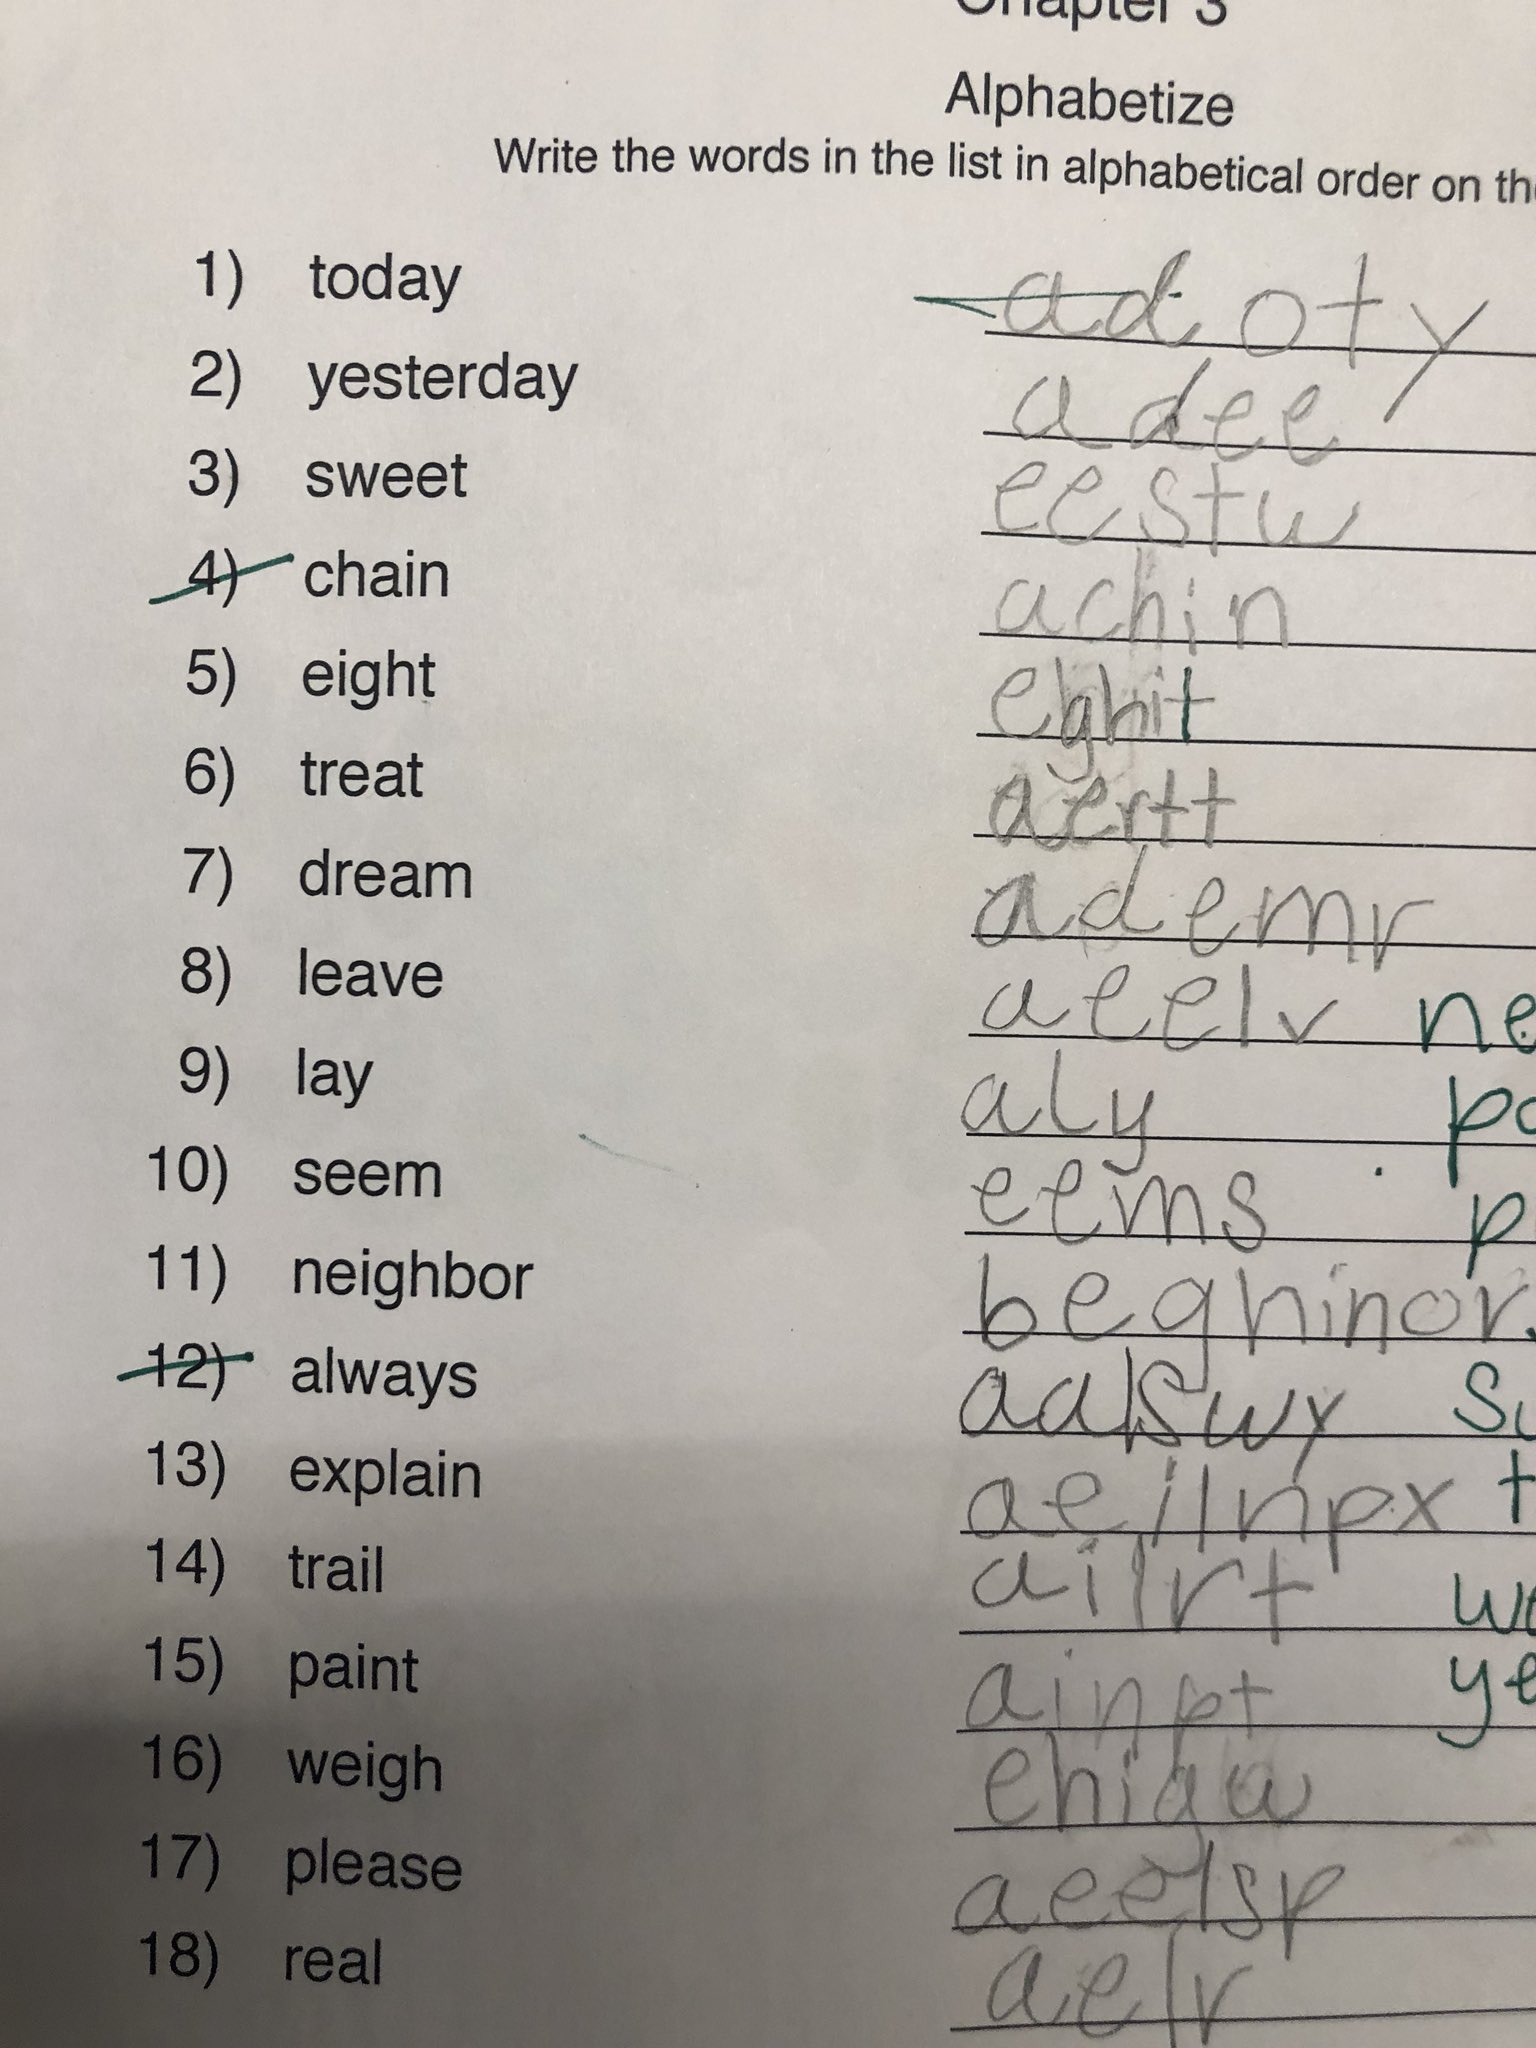 Paul Mitchell On Twitter For Homework It Said To Put The Words In Alphabetical Order So Senecarosesac Reorganized Each Letter In Each Word To Be Alphabetical She Gets This From Her Daddy